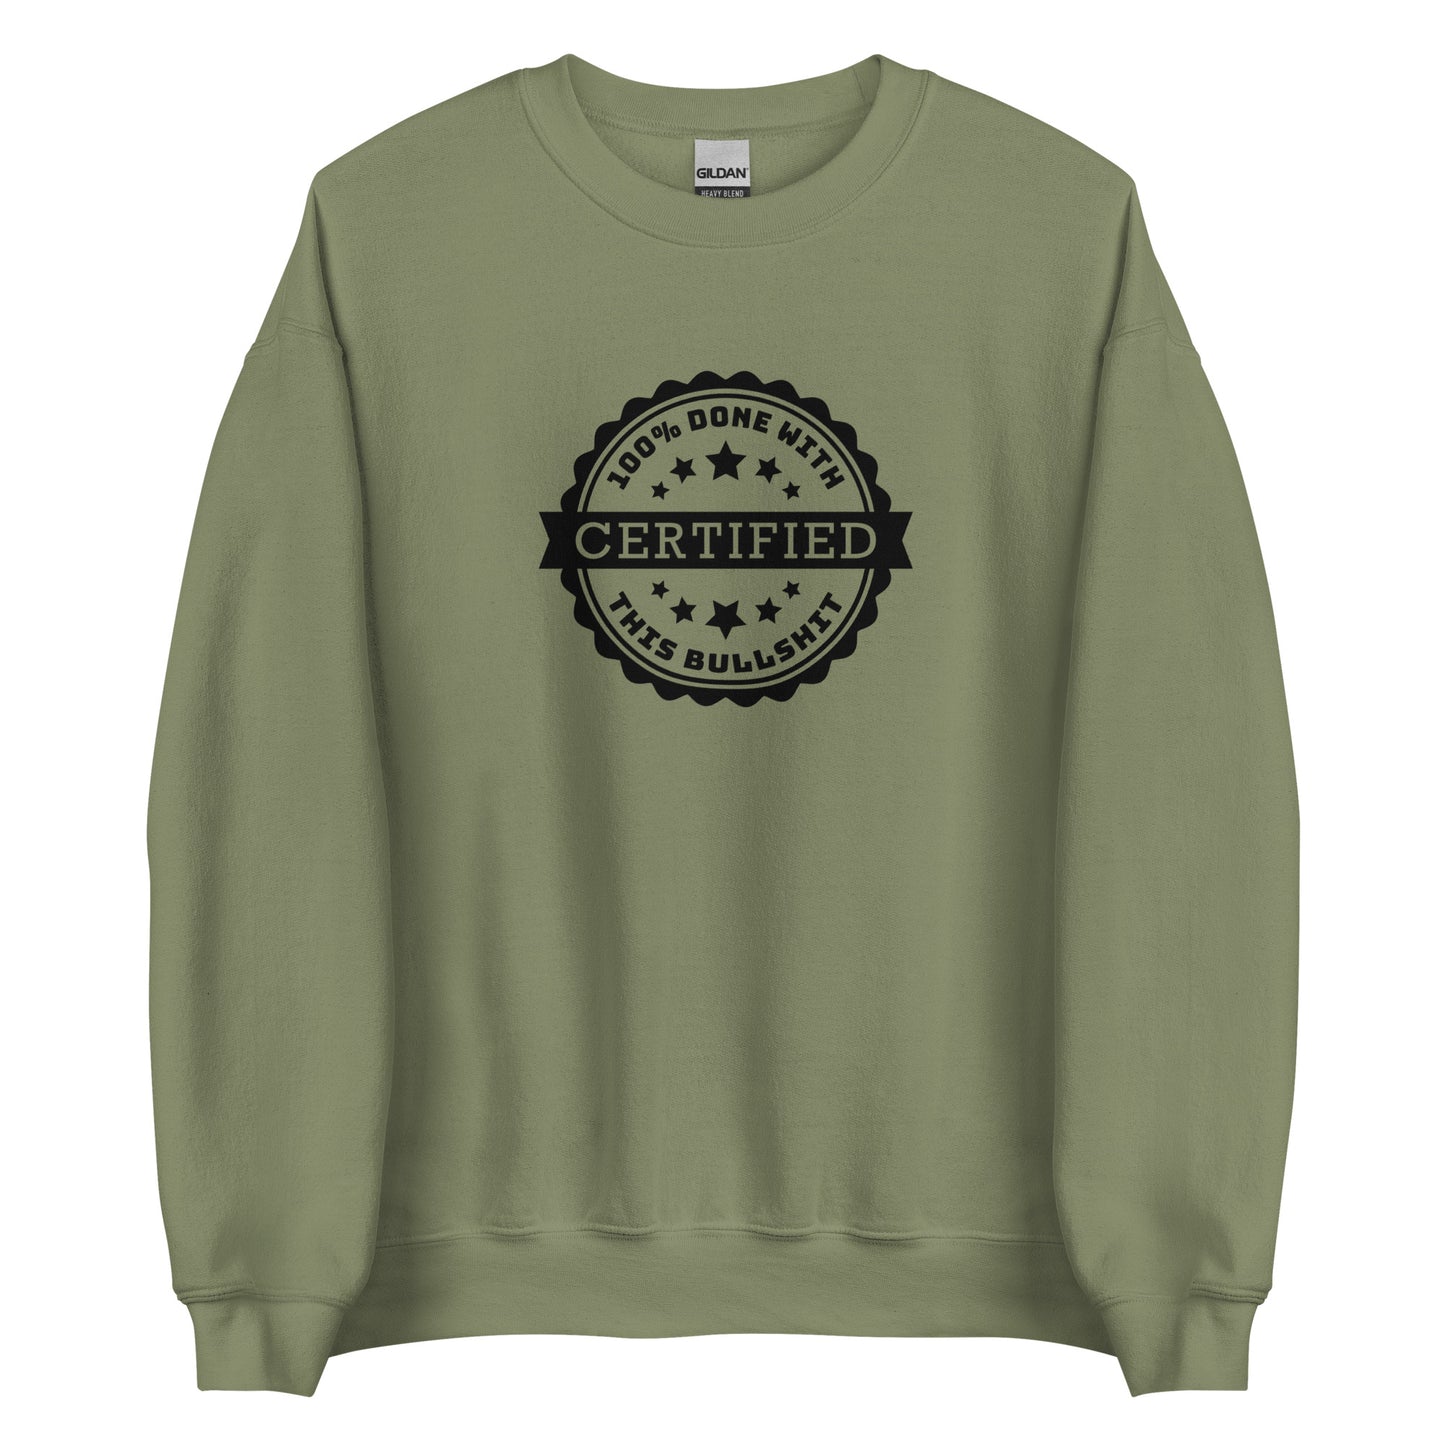 An olive green crewneck sweatshirt featuring a graphic of an official-looking stamped seal. Text on the seal reads: "CERTIFIED: 100% done with this bullshit"